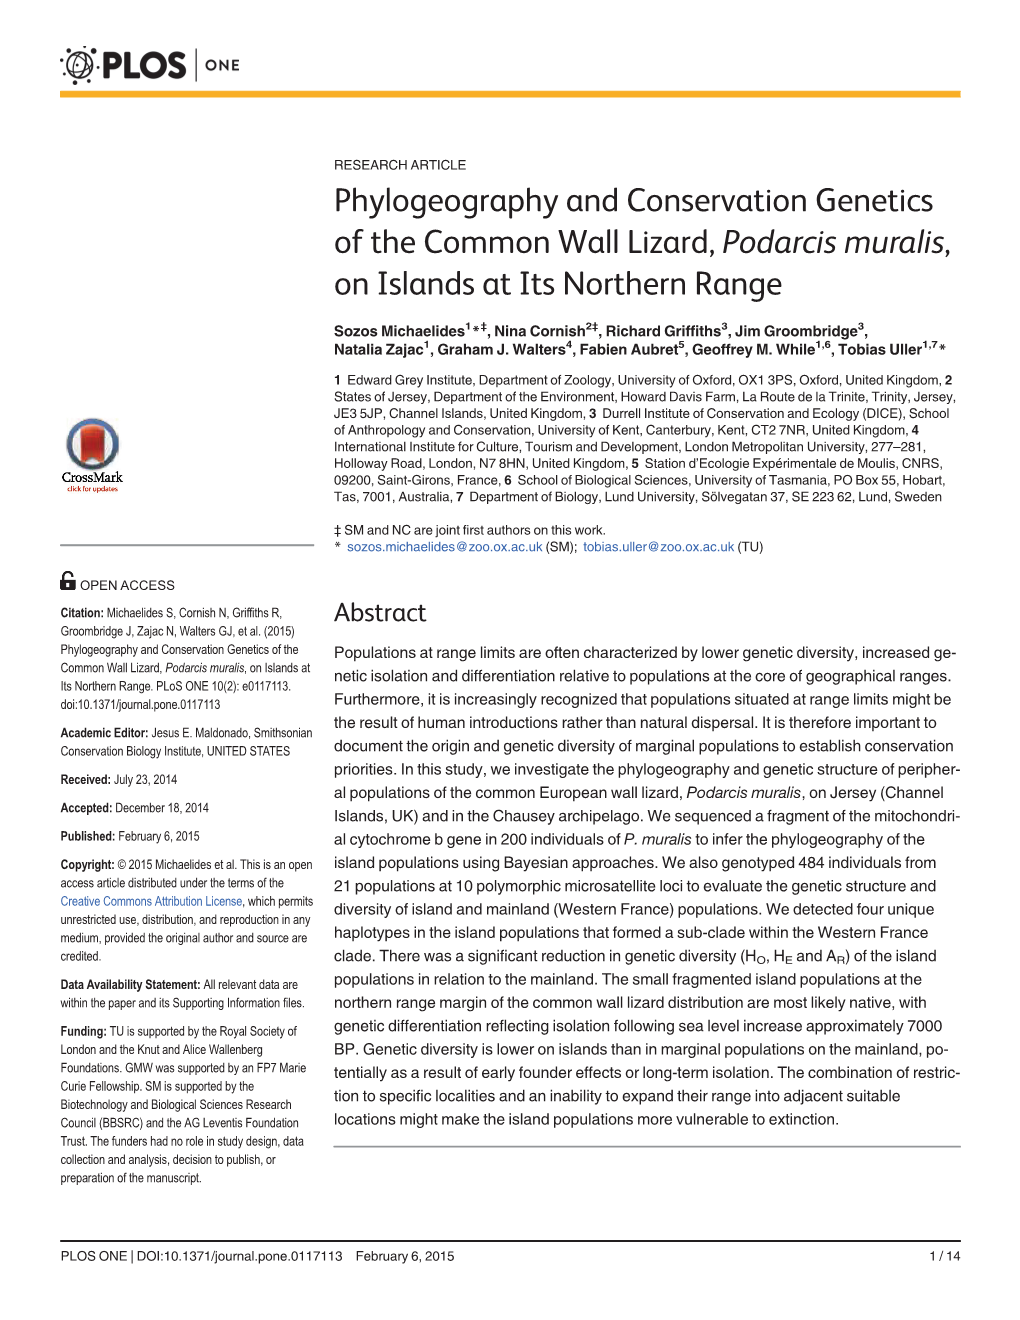 Phylogeography and Conservation Genetics of the Common Wall Lizard, Podarcis Muralis, on Islands at Its Northern Range